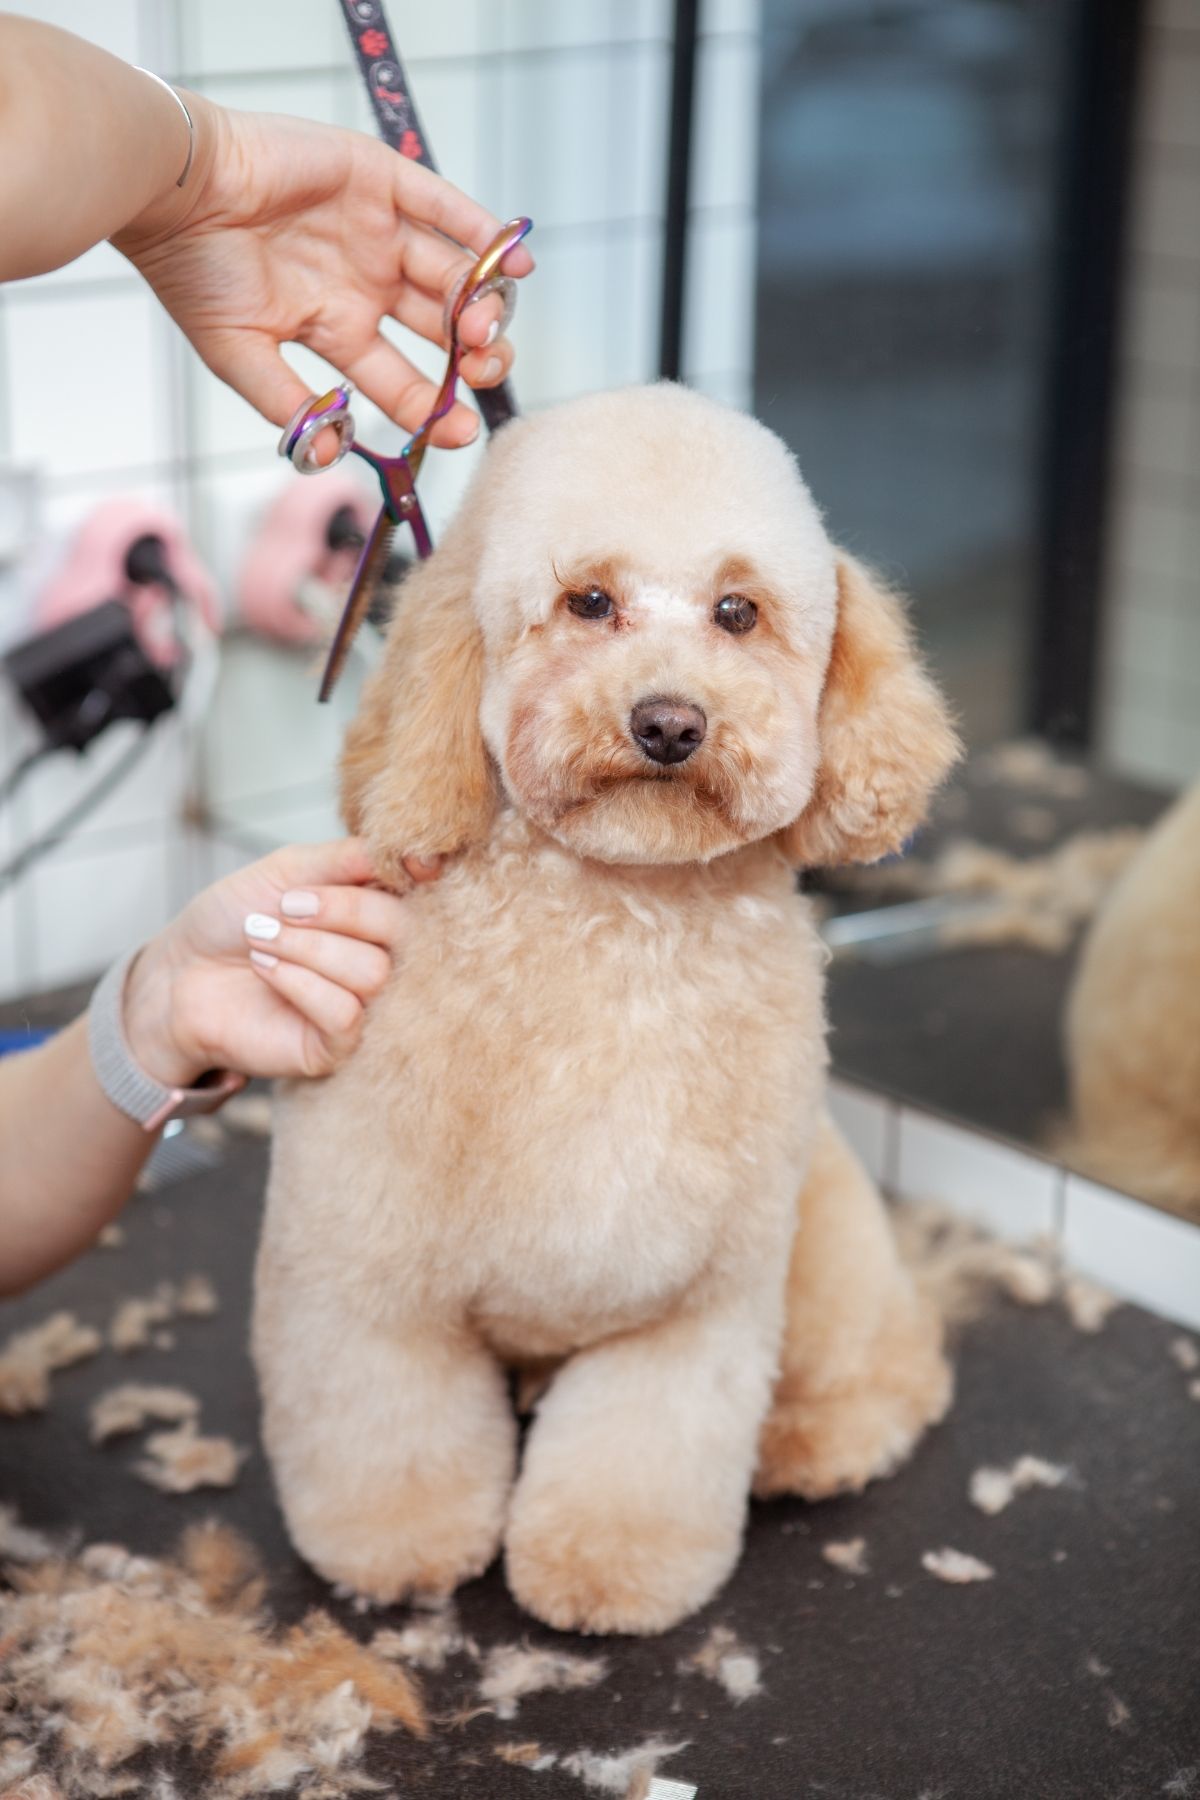 Cute poodle puppy gets groomed